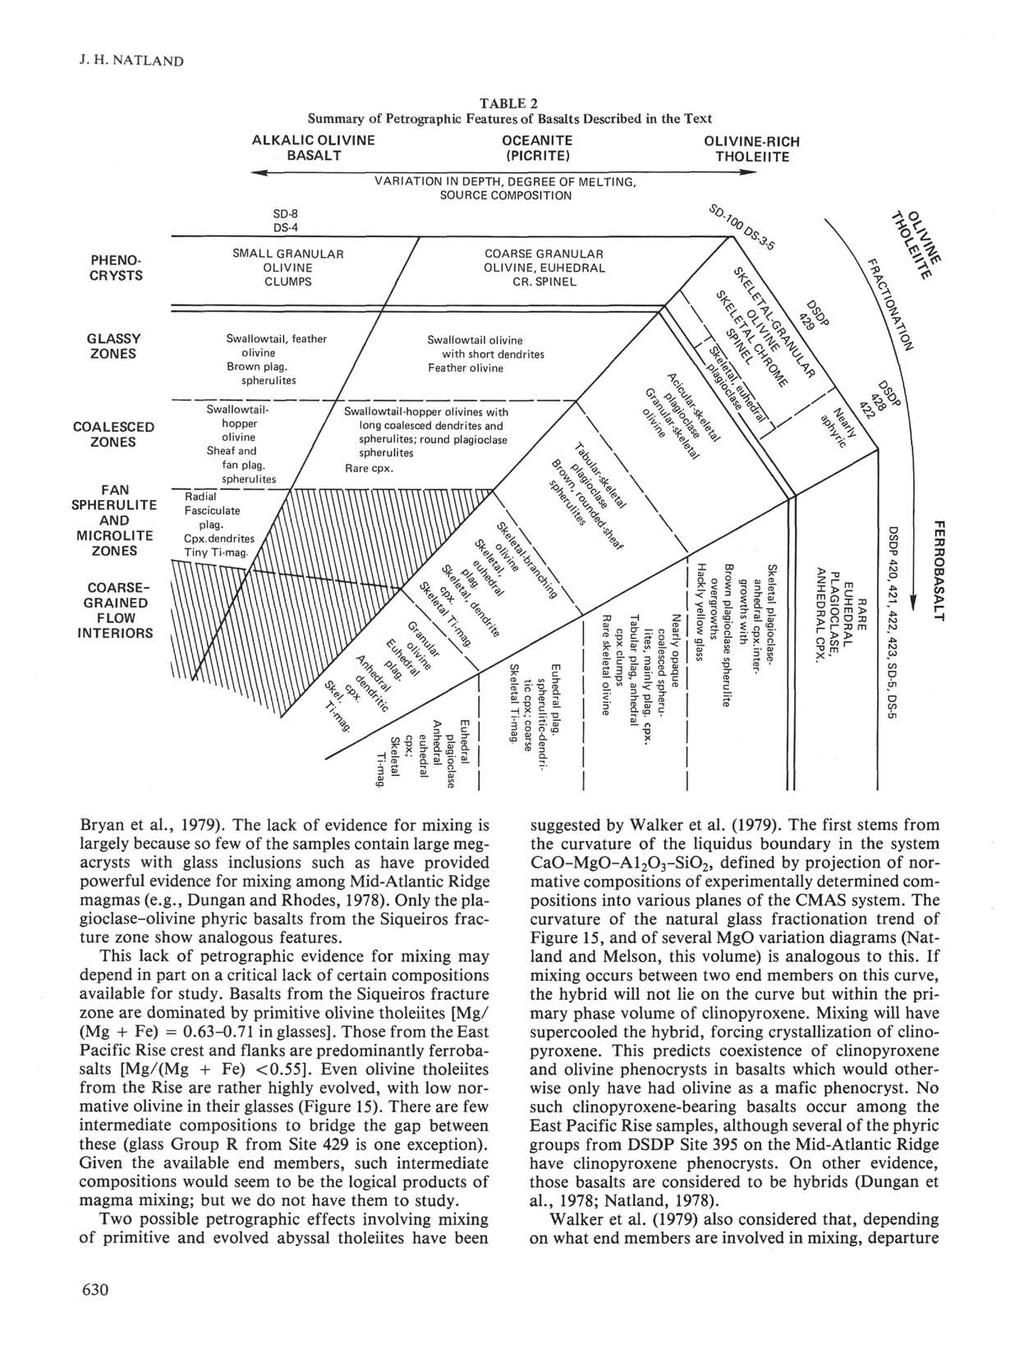 J. H. NATLAND TABLE 2 Summary of Petrographic Features of Basalts Described in the Text ALKALICOLIVINE BASALT OCEANITE (PICRITE) VARIATION IN DEPTH, DEGREE OF MELTING, SOURCE COMPOSITION